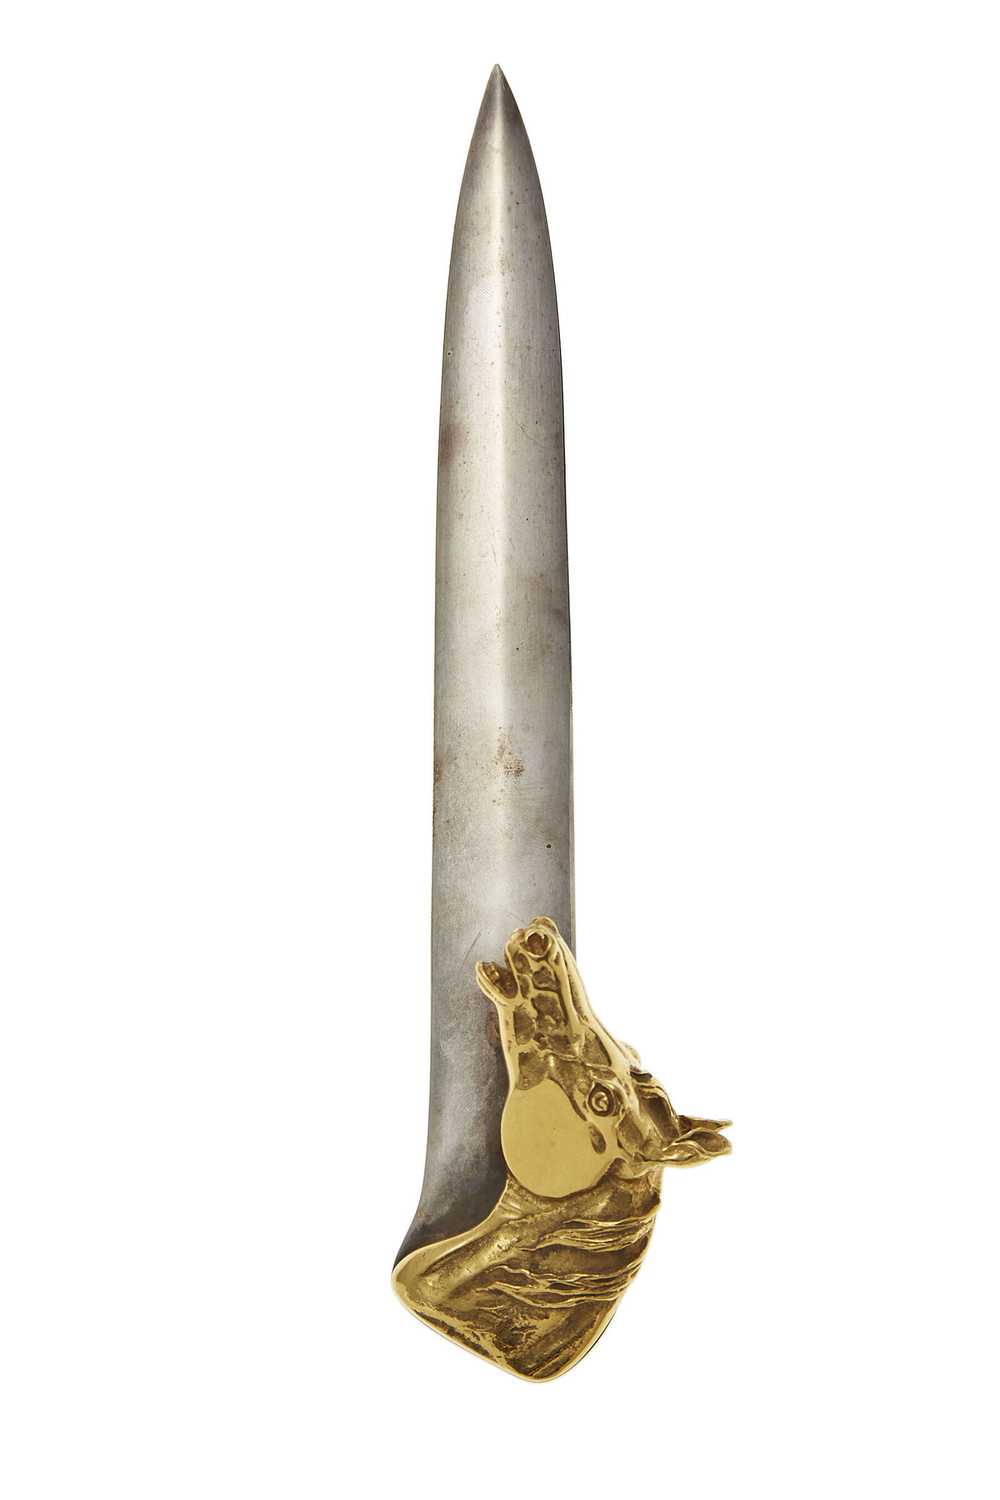 Silver & Gold Horse Head Letter Opener - image 1